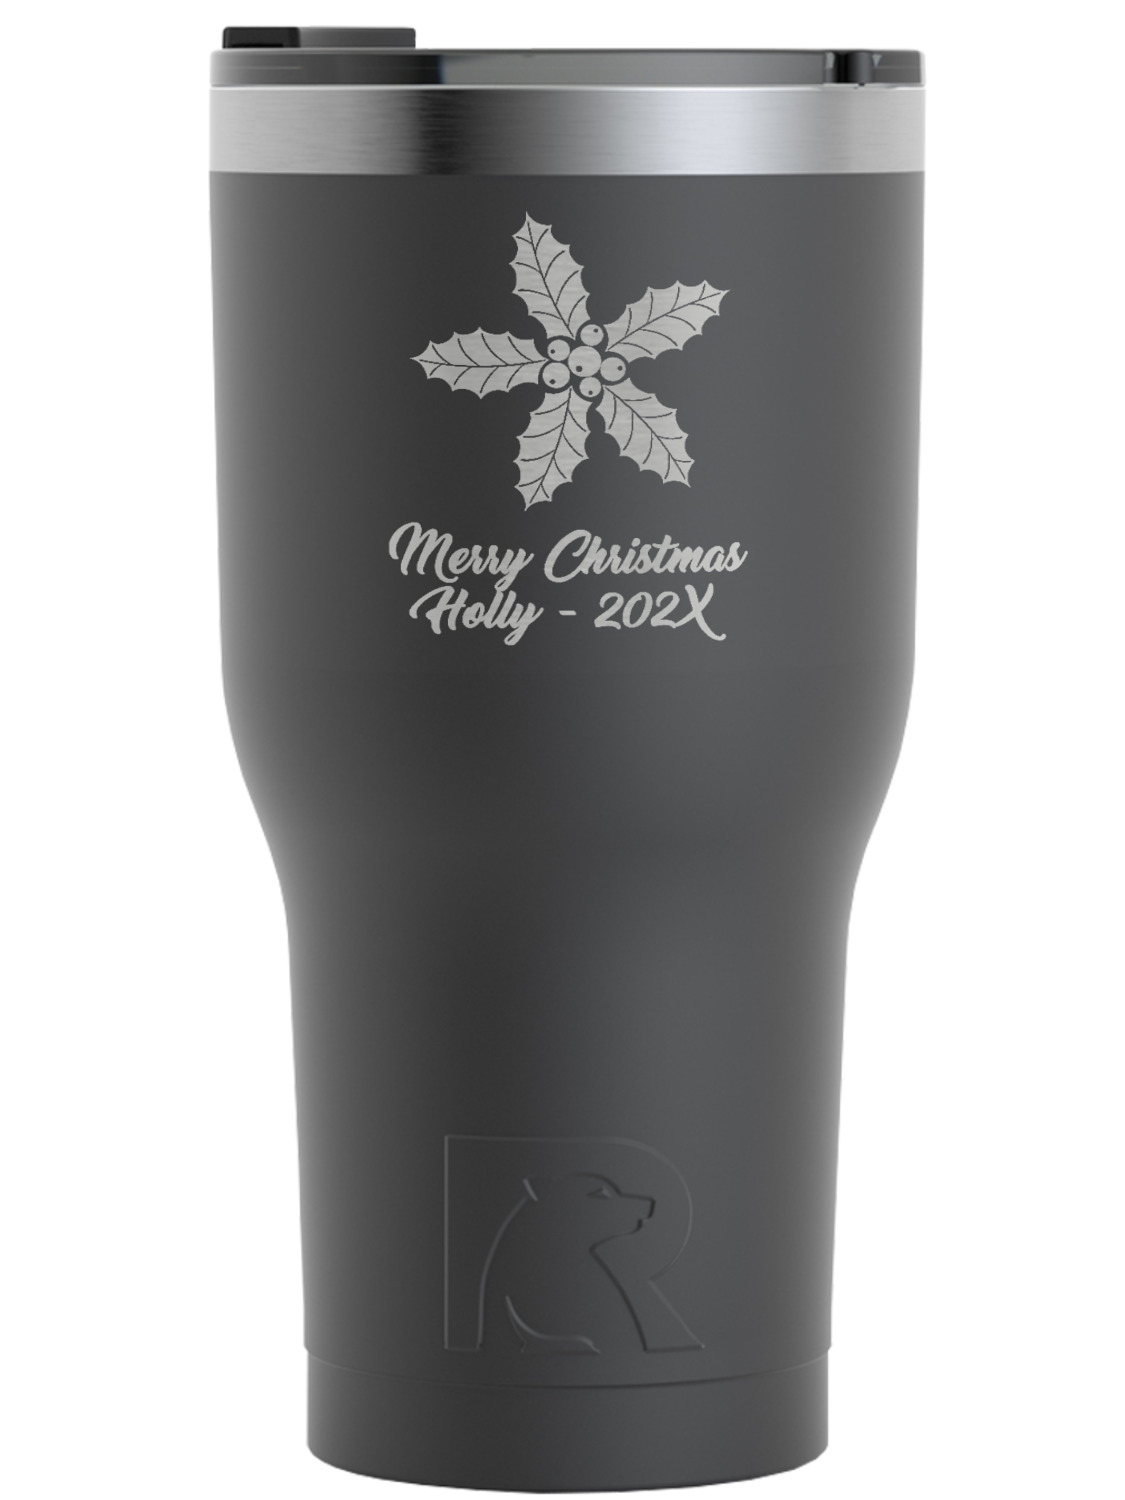 https://www.youcustomizeit.com/common/MAKE/204358/Christmas-Holly-Black-RTIC-Tumbler-Front.jpg?lm=1665683616